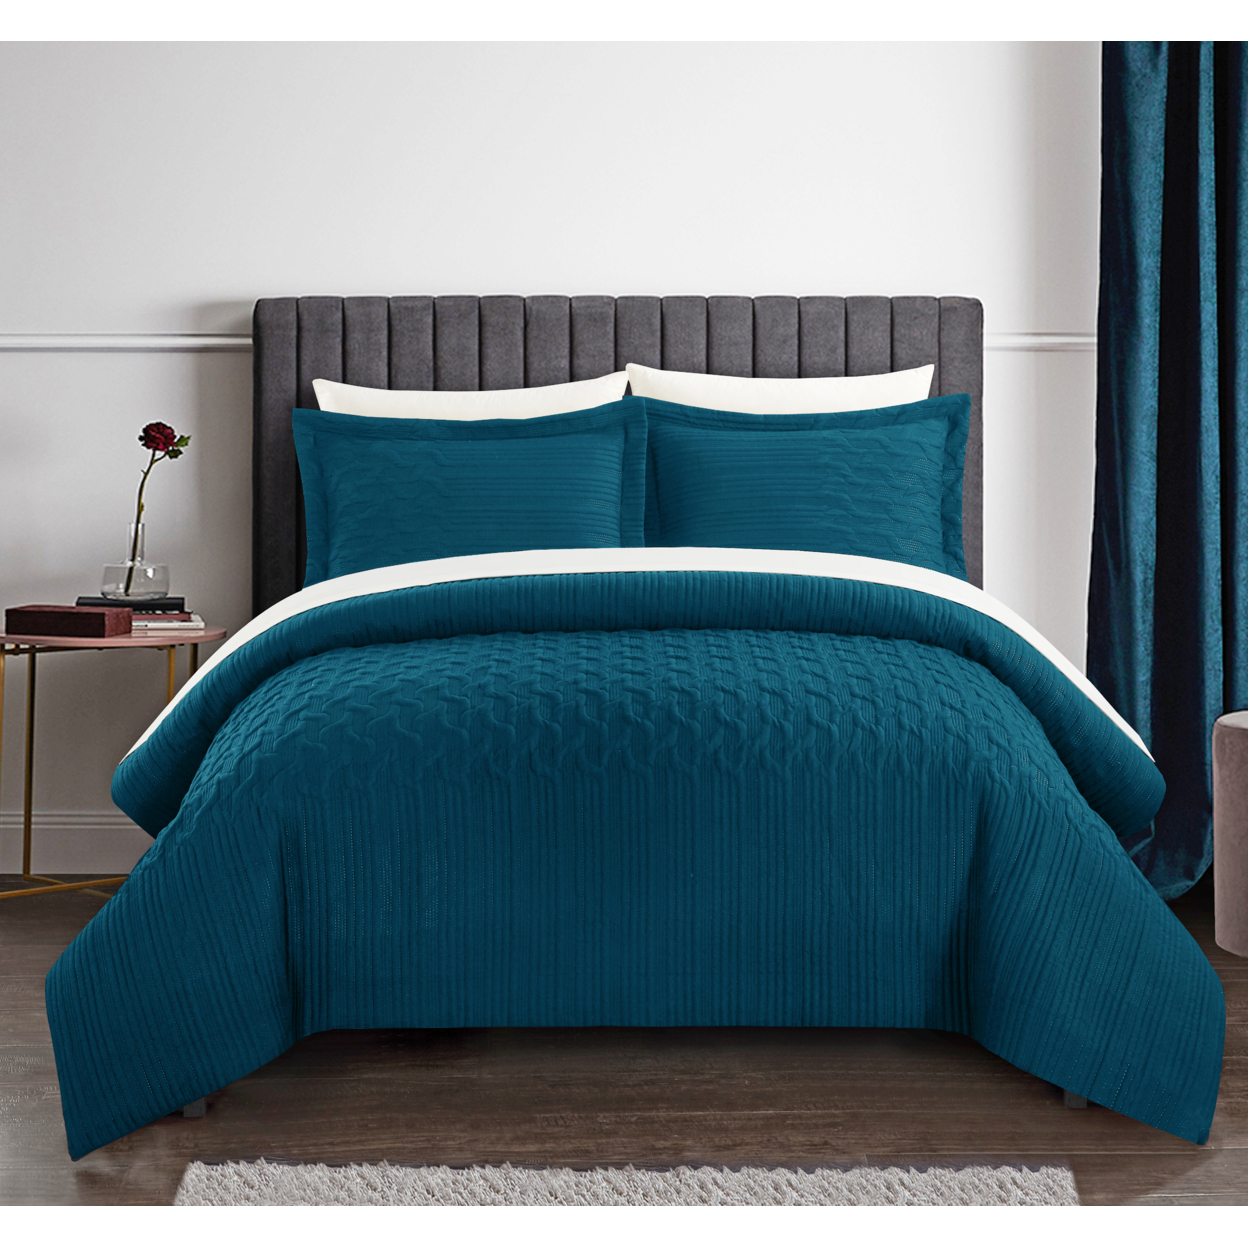 Jazmaine 3 Or 2 Piece Comforter Set Embossed Embroidered Quilted Geometric Vine Pattern Bedding - Teal, King